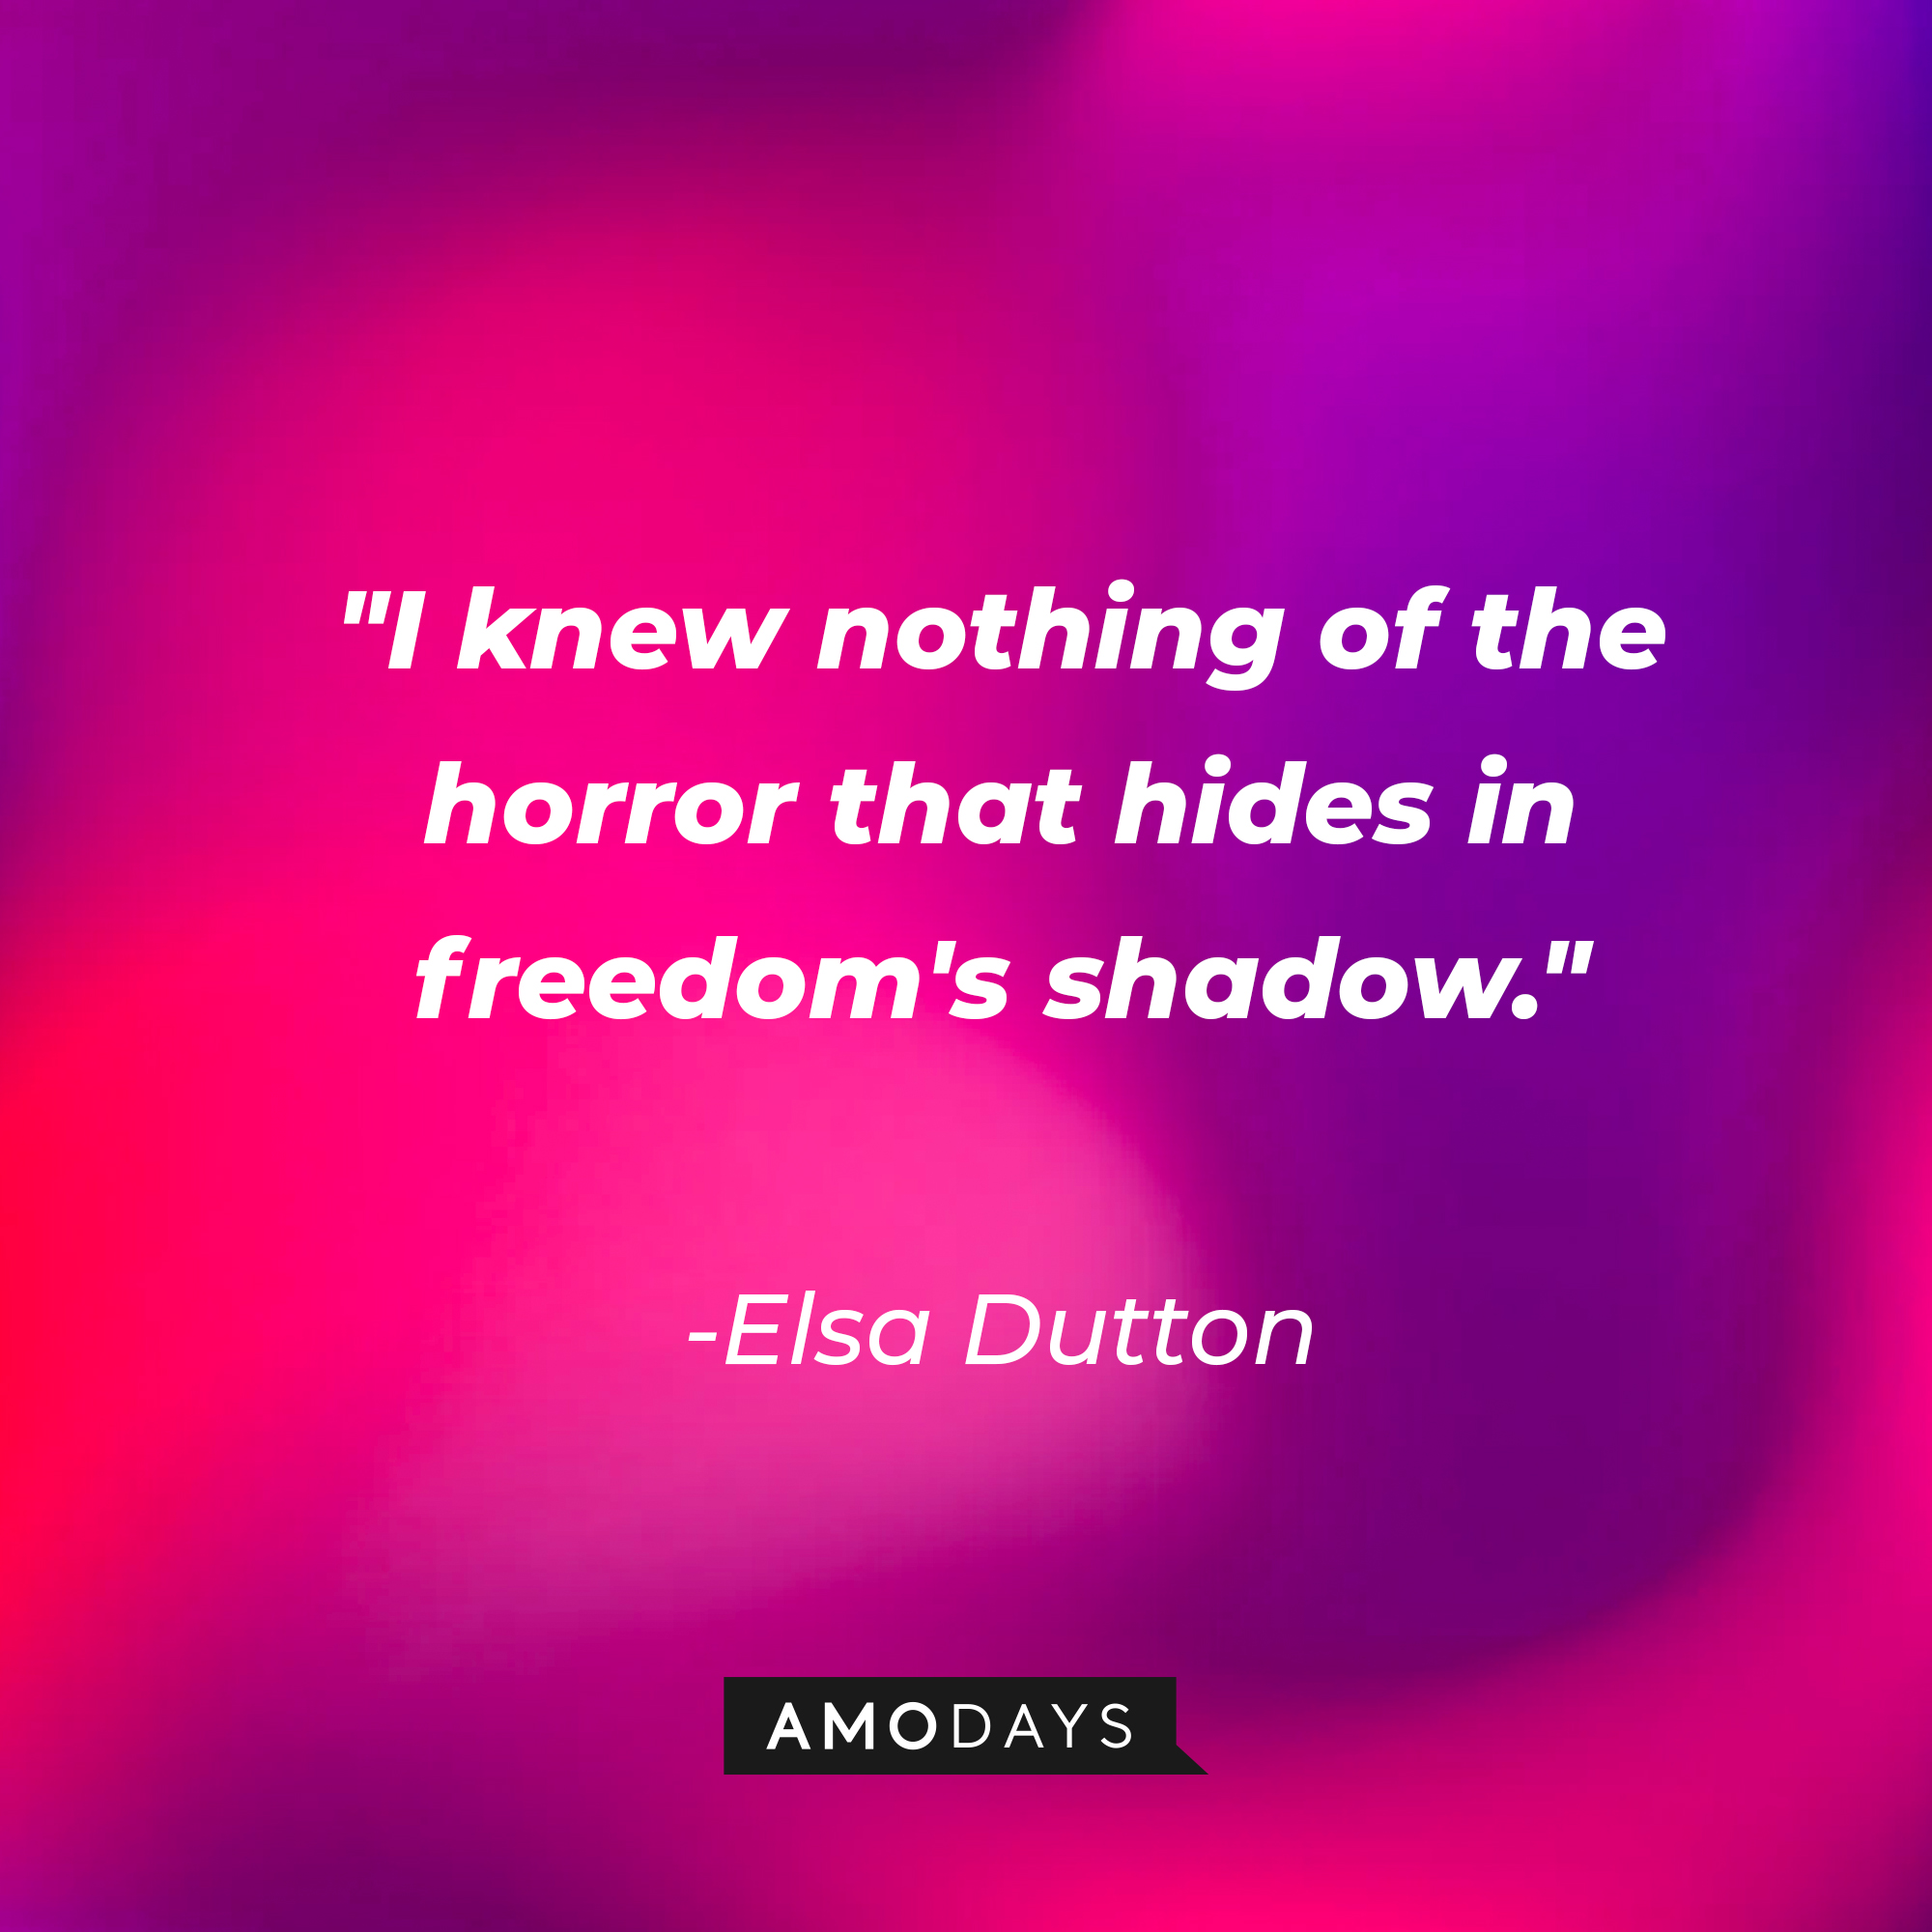 Elsa Dutton’s quote: "I knew nothing of the horror that hides in freedom's shadow." | Source: AmoDays